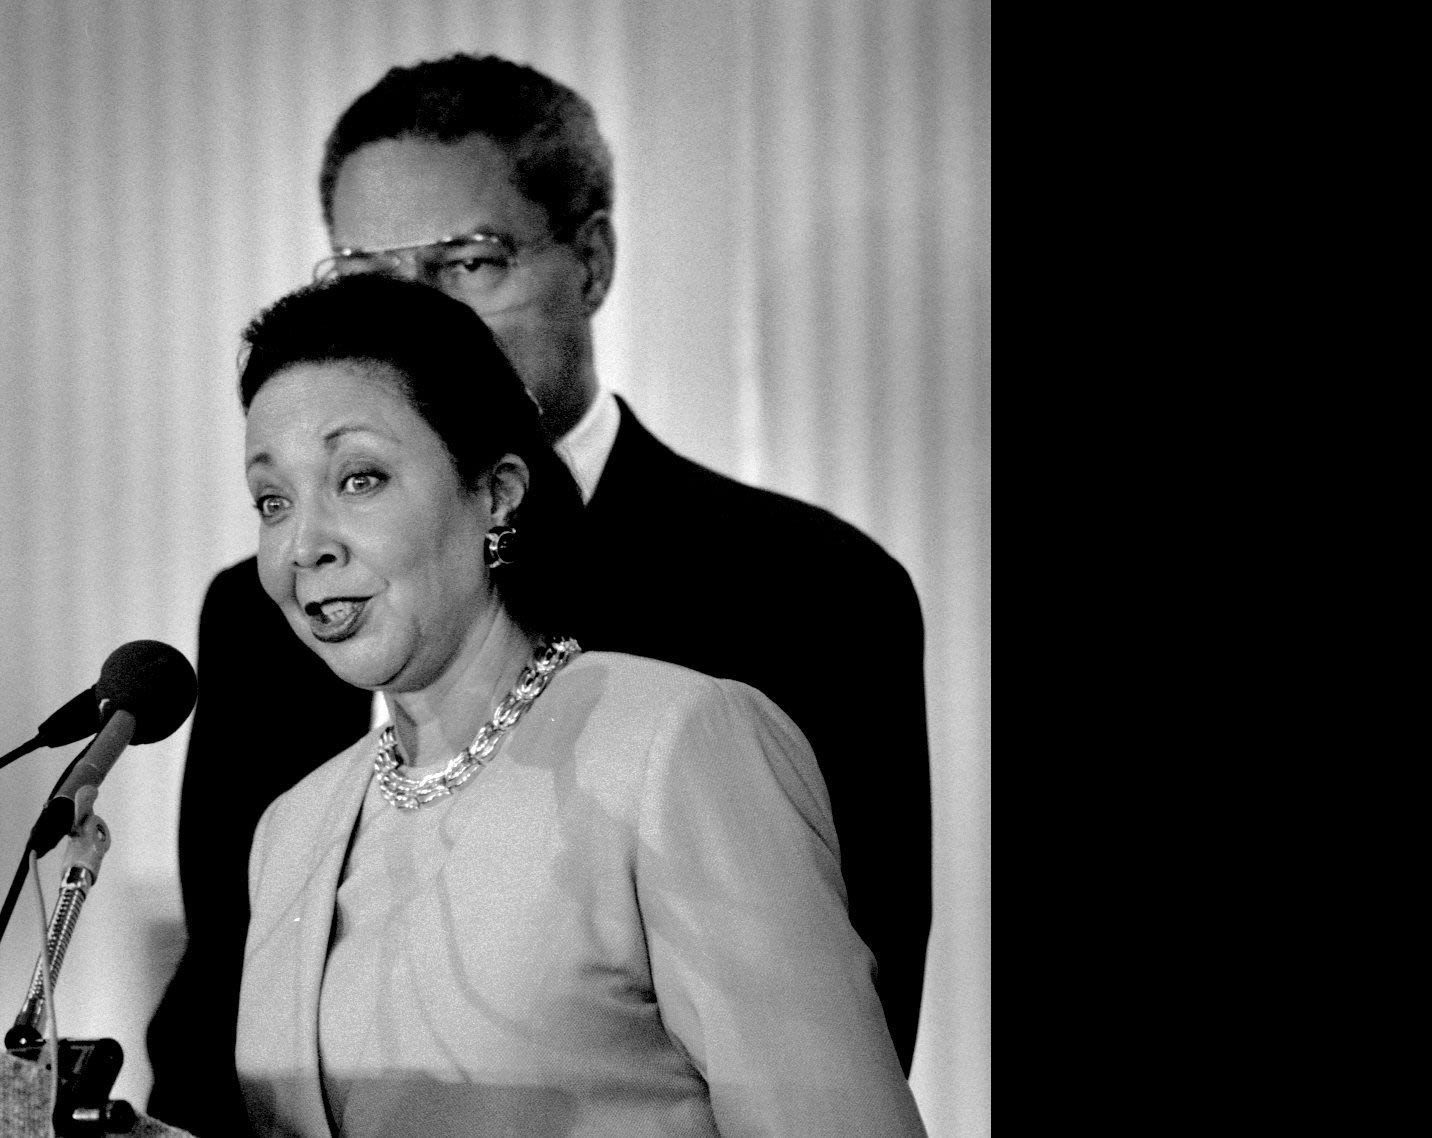 Alma Powell, civic leader and wife of the late Colin Powell, dies at 86